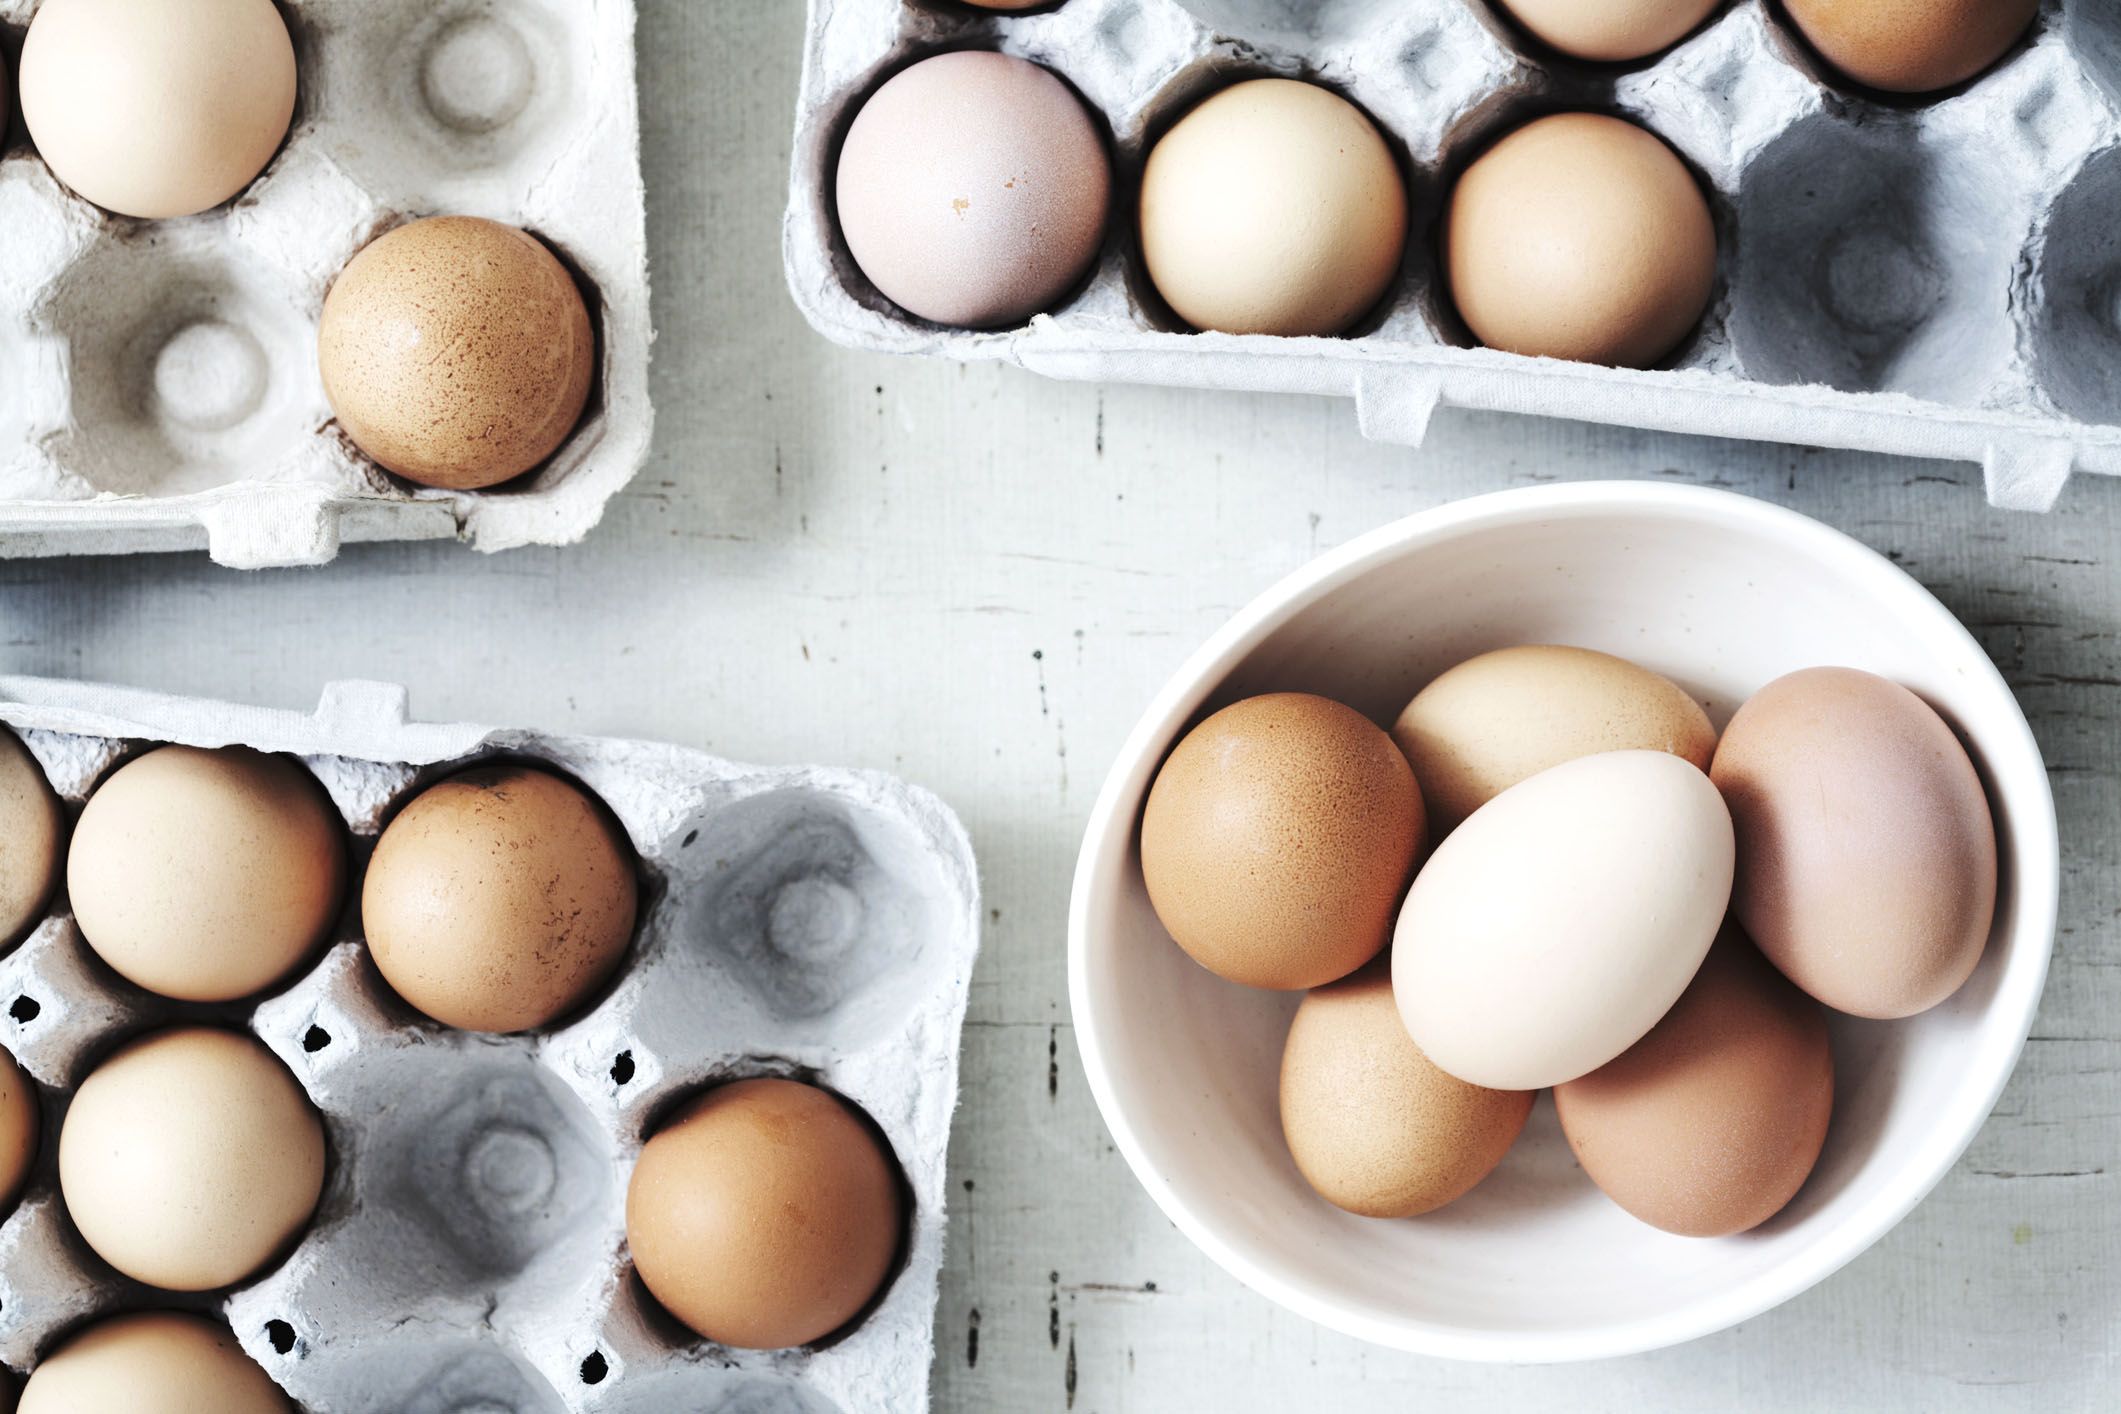 How to Tell if Eggs are Good or Bad